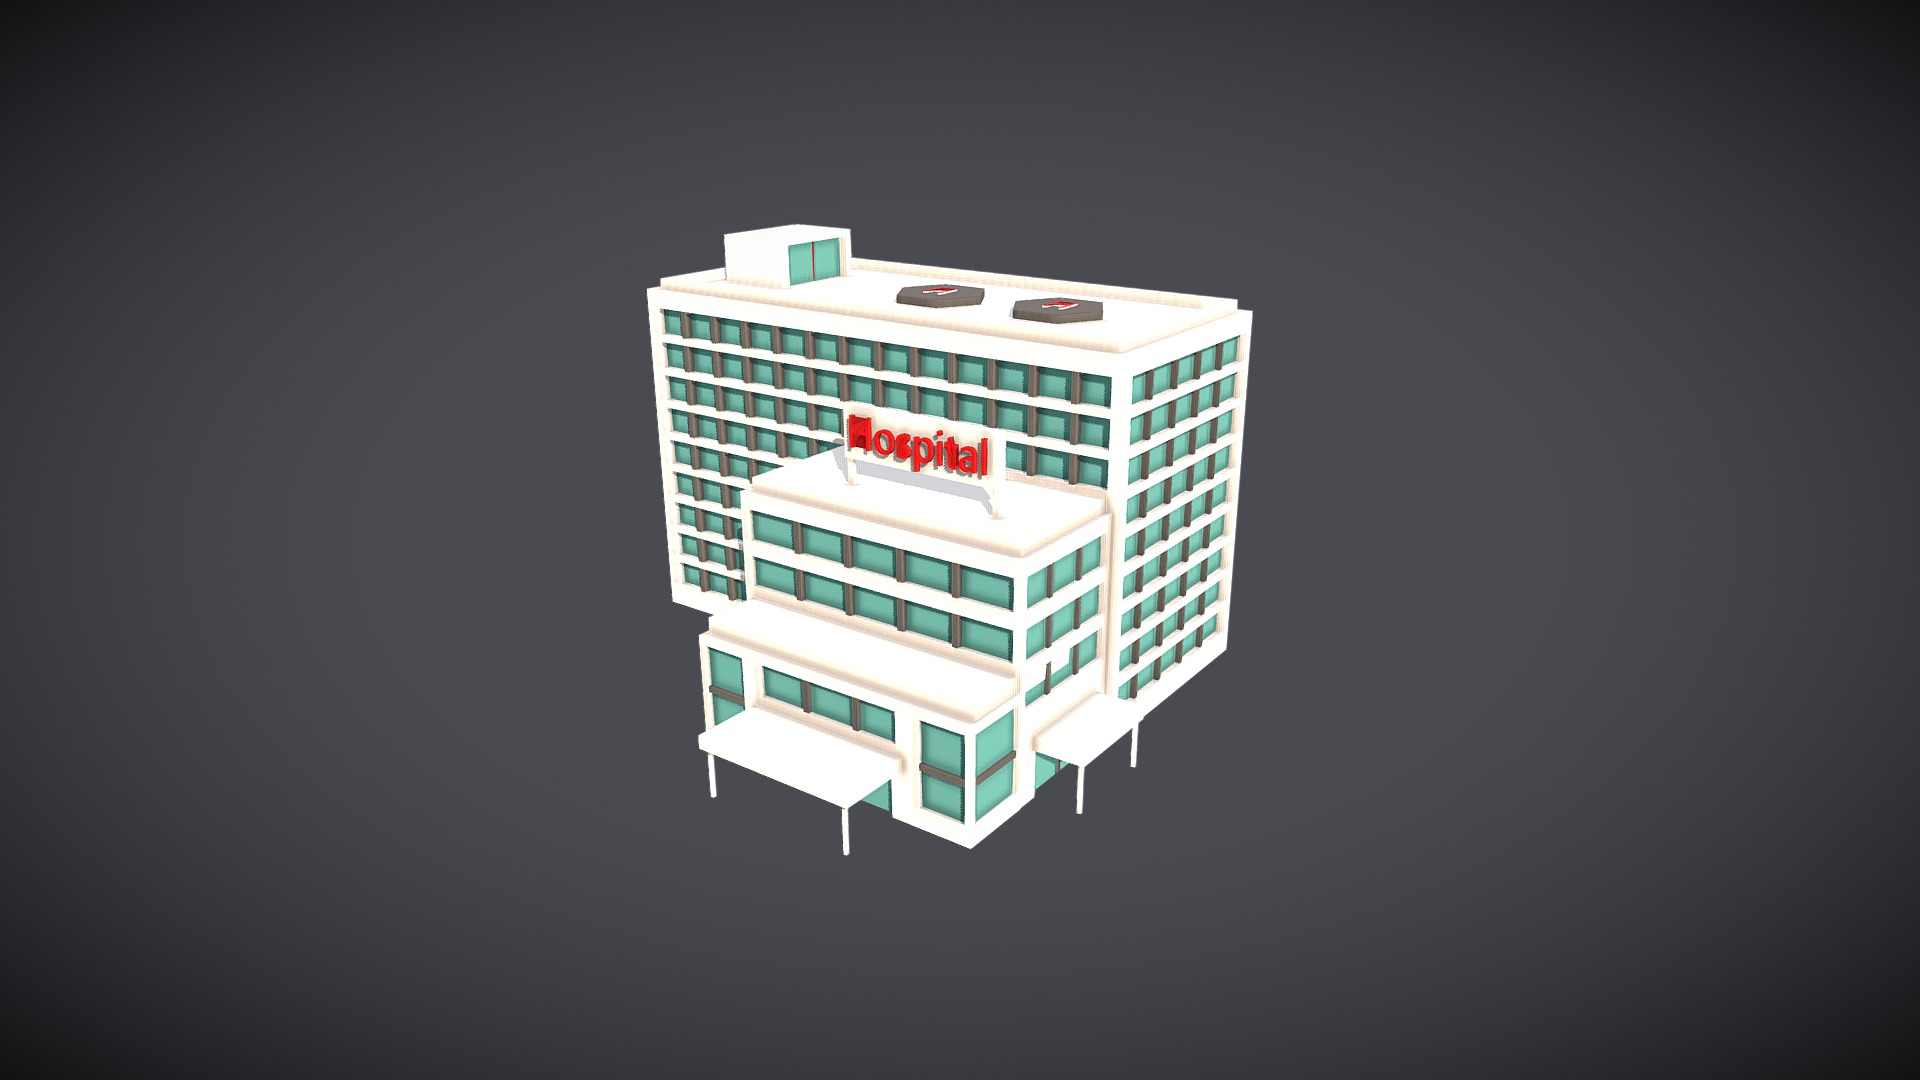 3D model Low-Poly Hospital - This is a 3D model of the Low-Poly Hospital. The 3D model is about a building with a sign on it.